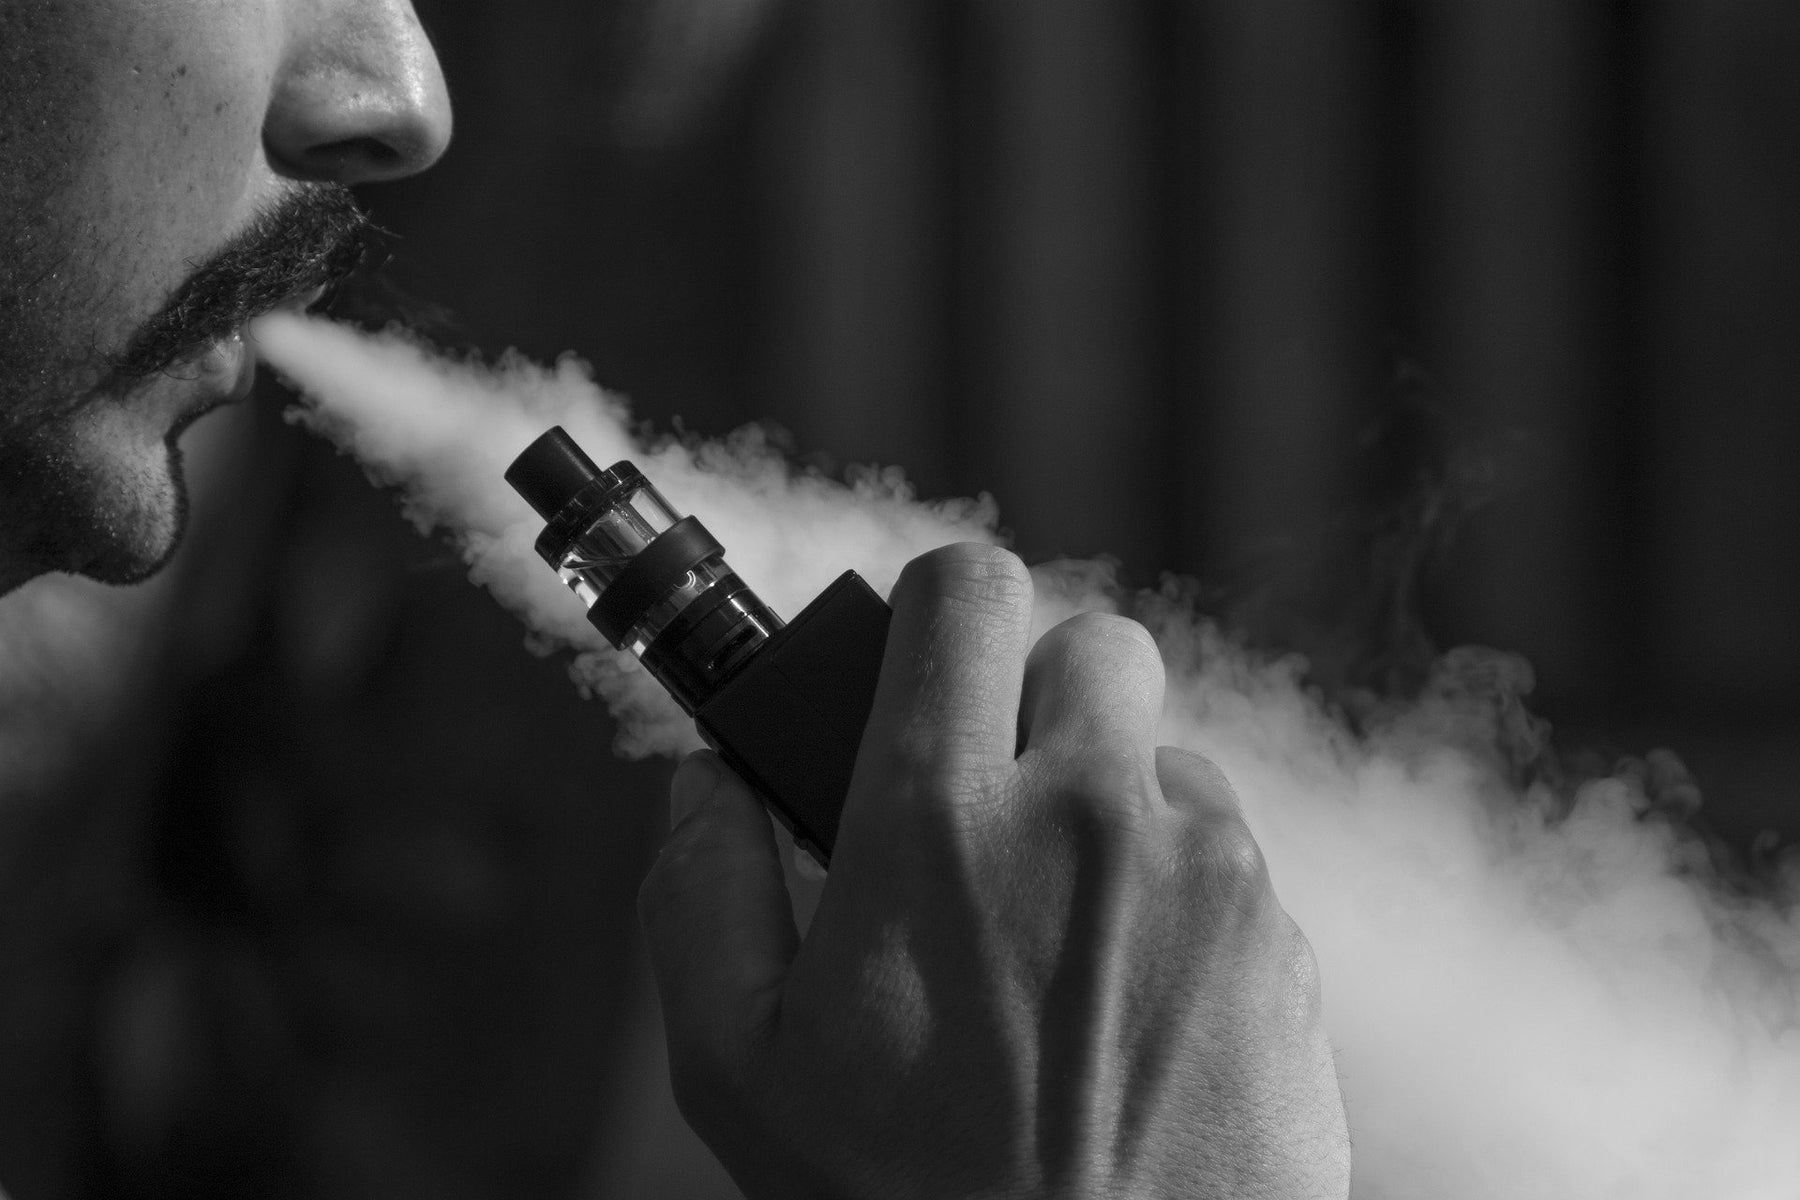 Vaping Without Nicotine: What You Need to Know